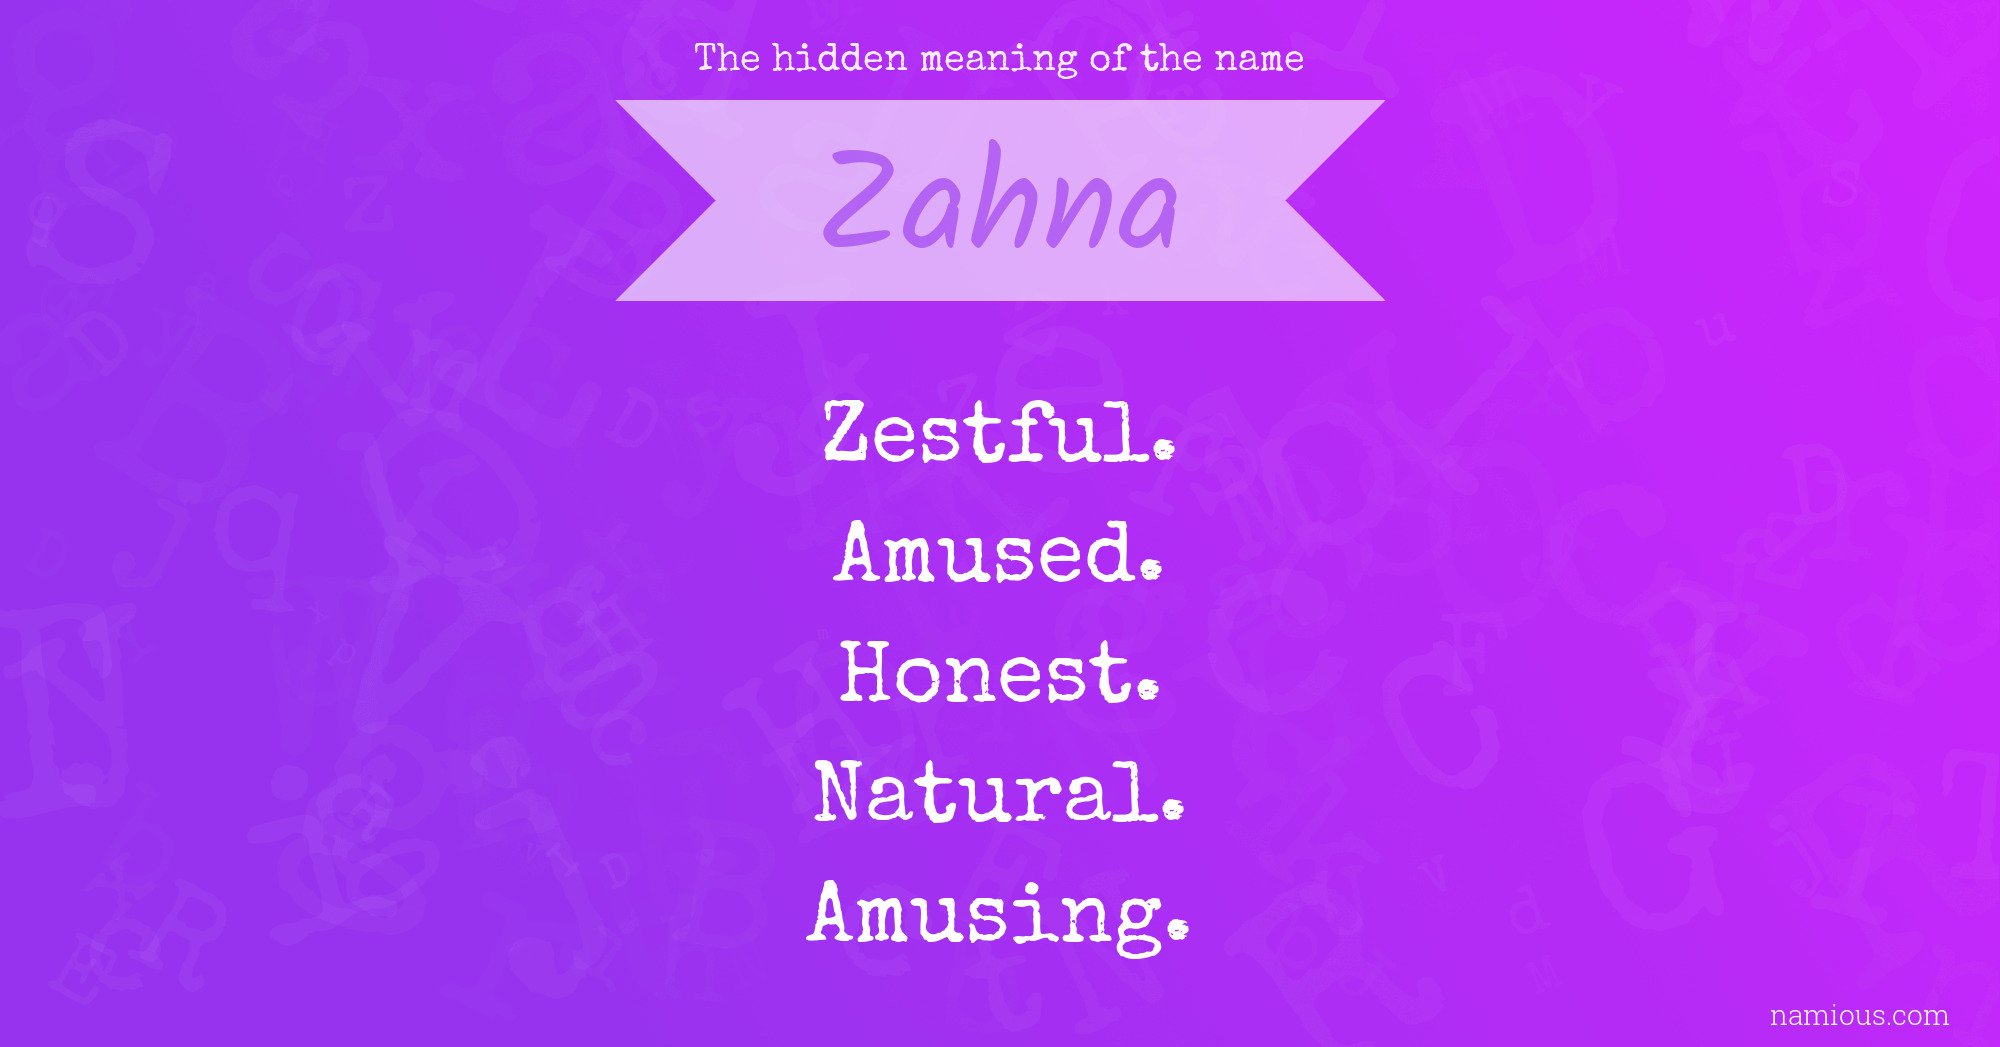 The hidden meaning of the name Zahna